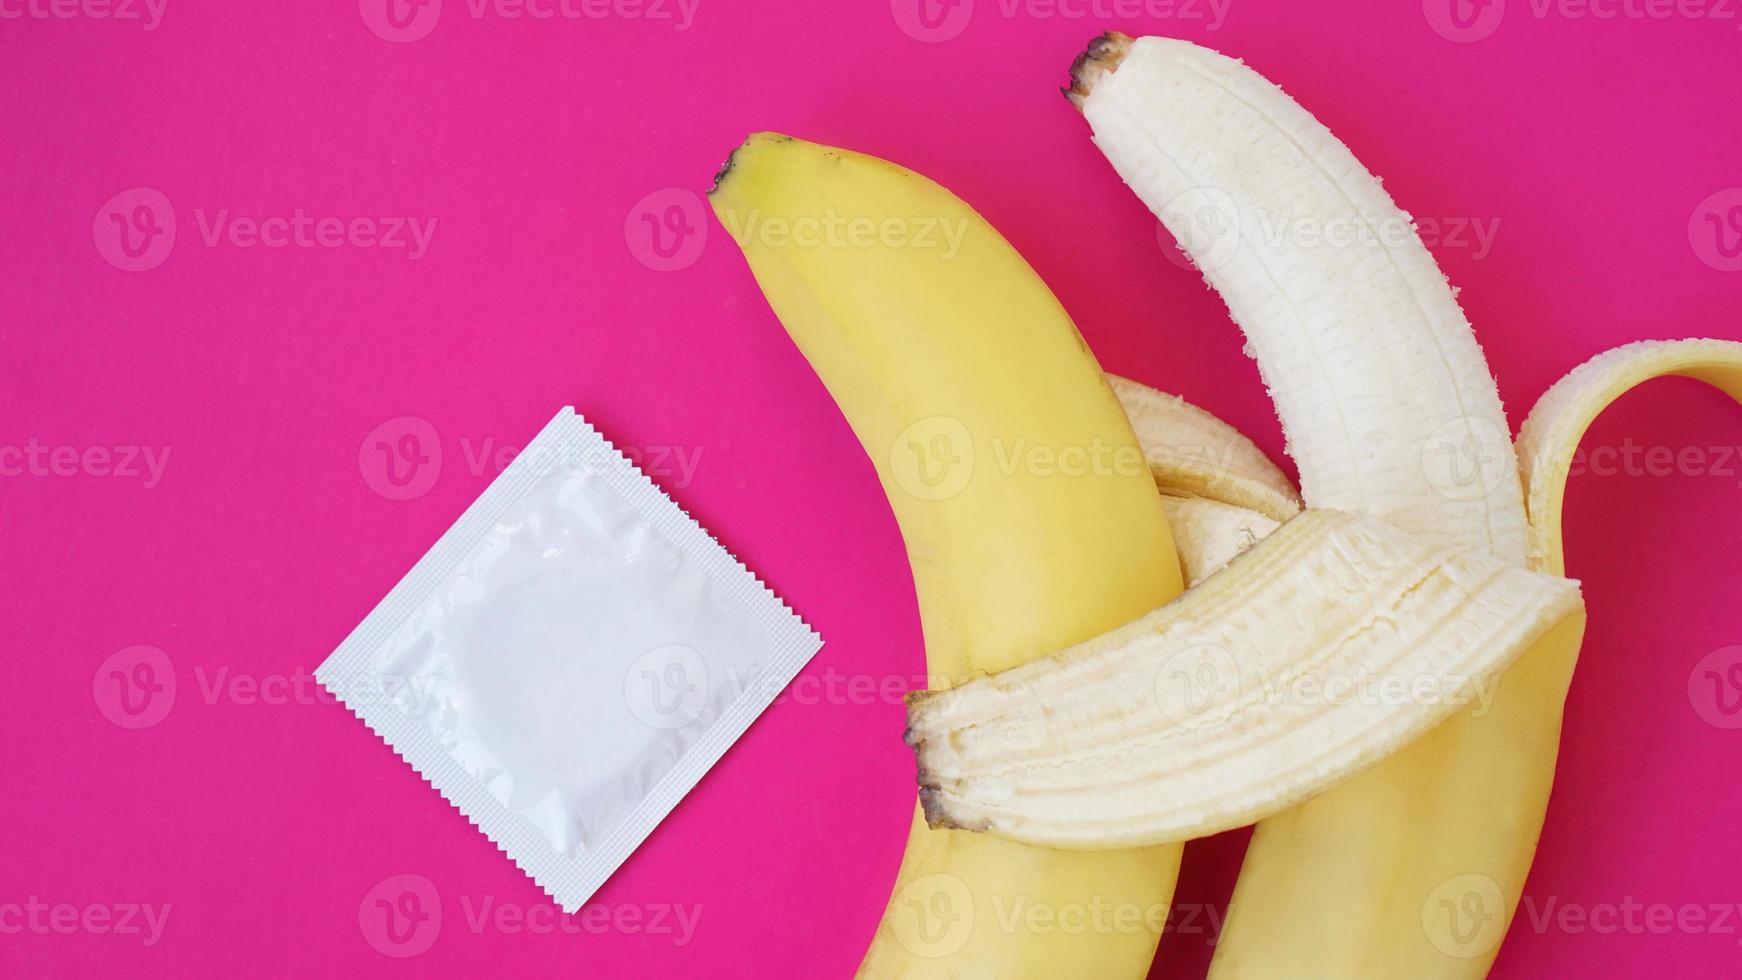 Condoms and two bananas together, concept of contraceptives photo